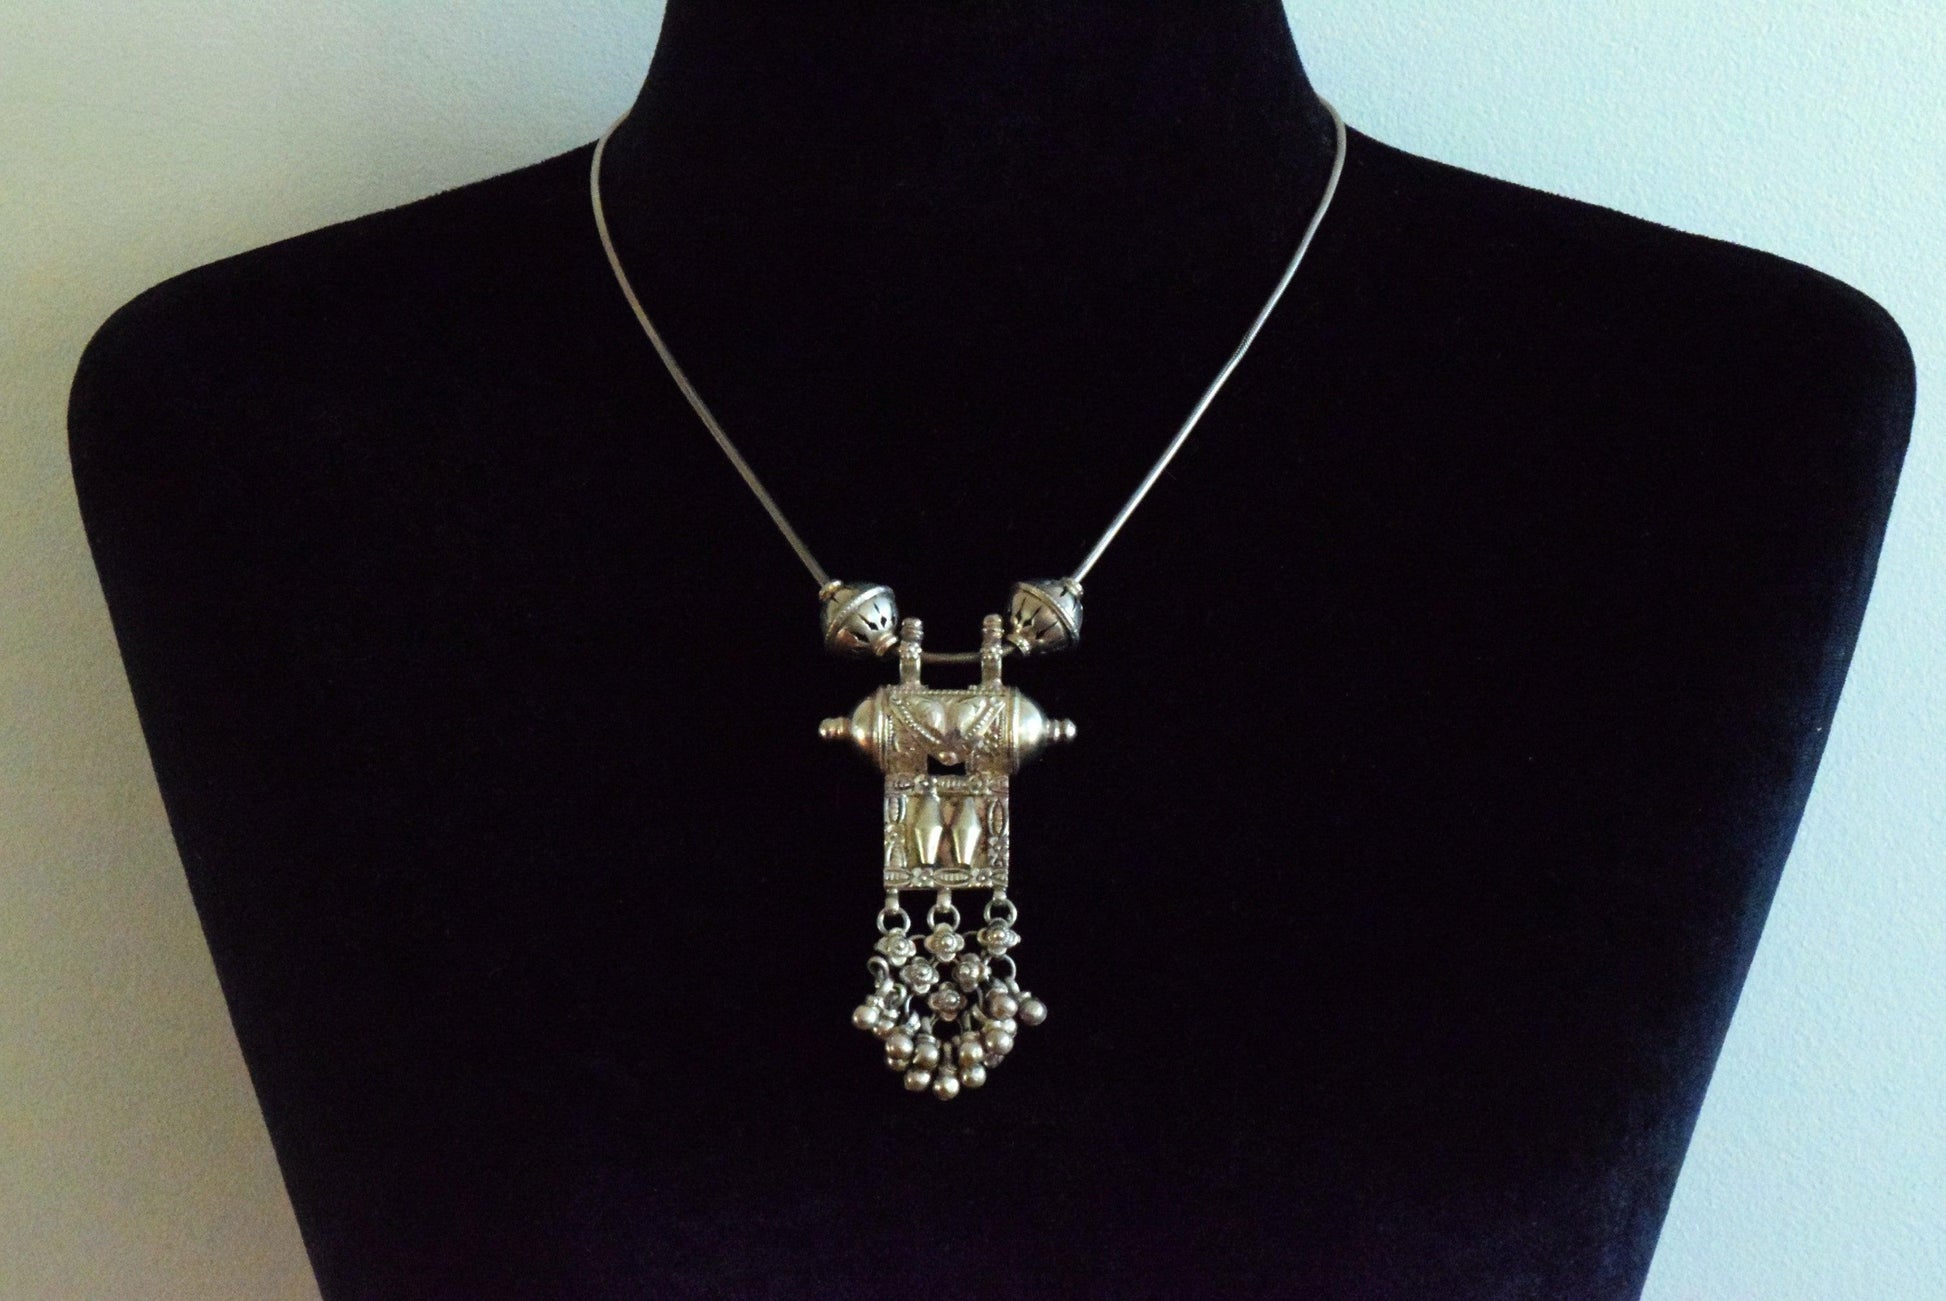 Vintage Silver Indian Necklace with Snake Chain - Anteeka